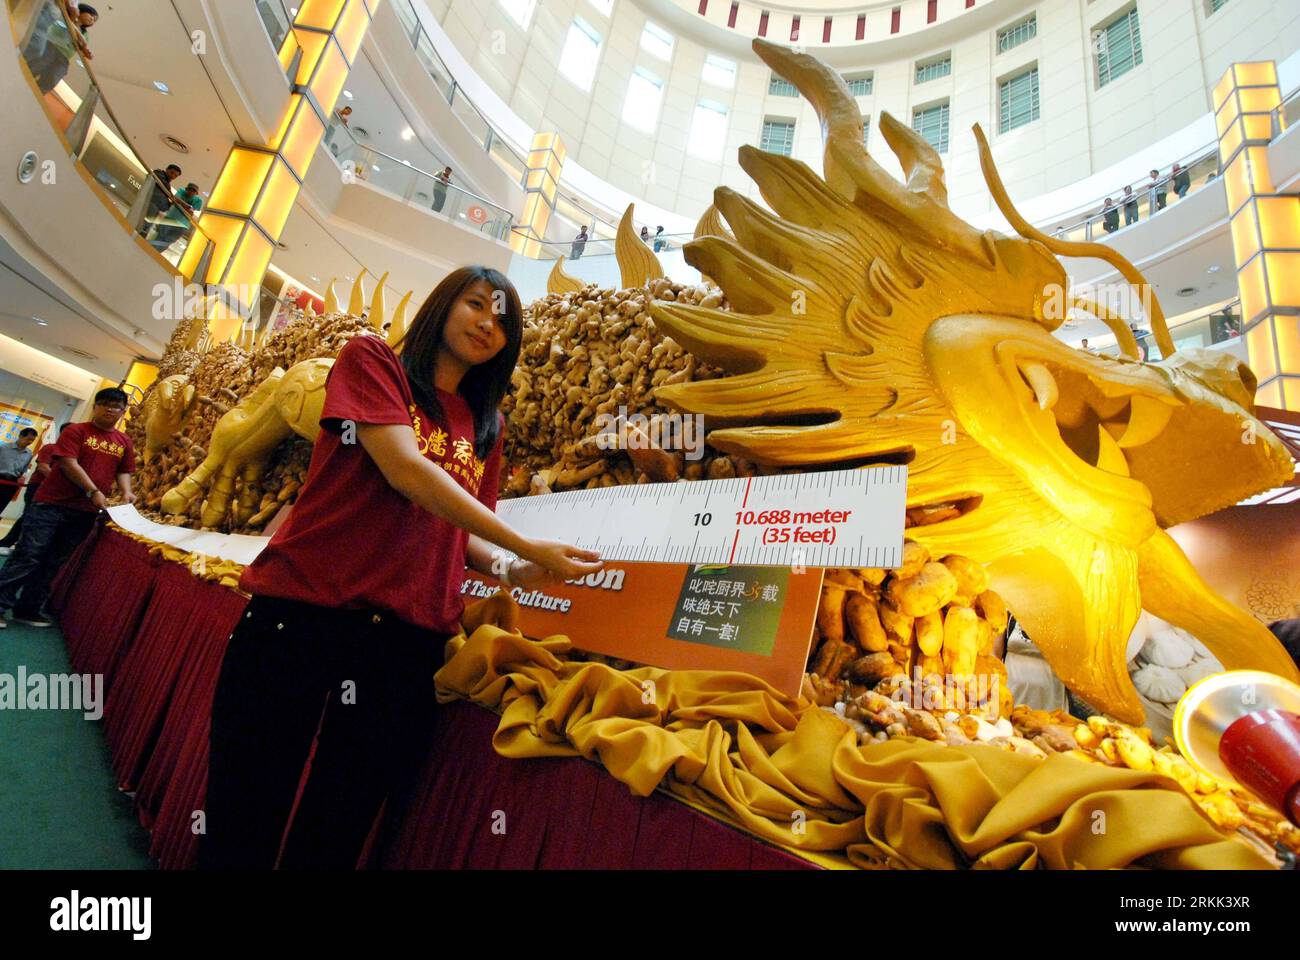 Bildnummer: 56195773  Datum: 19.10.2011  Copyright: imago/Xinhua (111019) -- KUALA LUMPUR, Oct. 19, 2011 (Xinhua) -- Staff members measure the length of a huge dragon sculpture which is made of ginger and lotus root in a shop in Kuala Lumpur, Malaysia, Oct. 19, 2011. The dragon sculpture measures 10.688 meters long and it took 20 workers in 2 months time in making. (Xinhua/Chong Voon Chung) MALAYSIA-KUALA LUMPUR-DRAGON MADE OF GINGER PUBLICATIONxNOTxINxCHN Gesellschaft Skulptur Figur Drachen Ingwer Lotoswurzel Kurios xbs x0x 2011 quer premiumd      56195773 Date 19 10 2011 Copyright Imago XINH Stock Photo